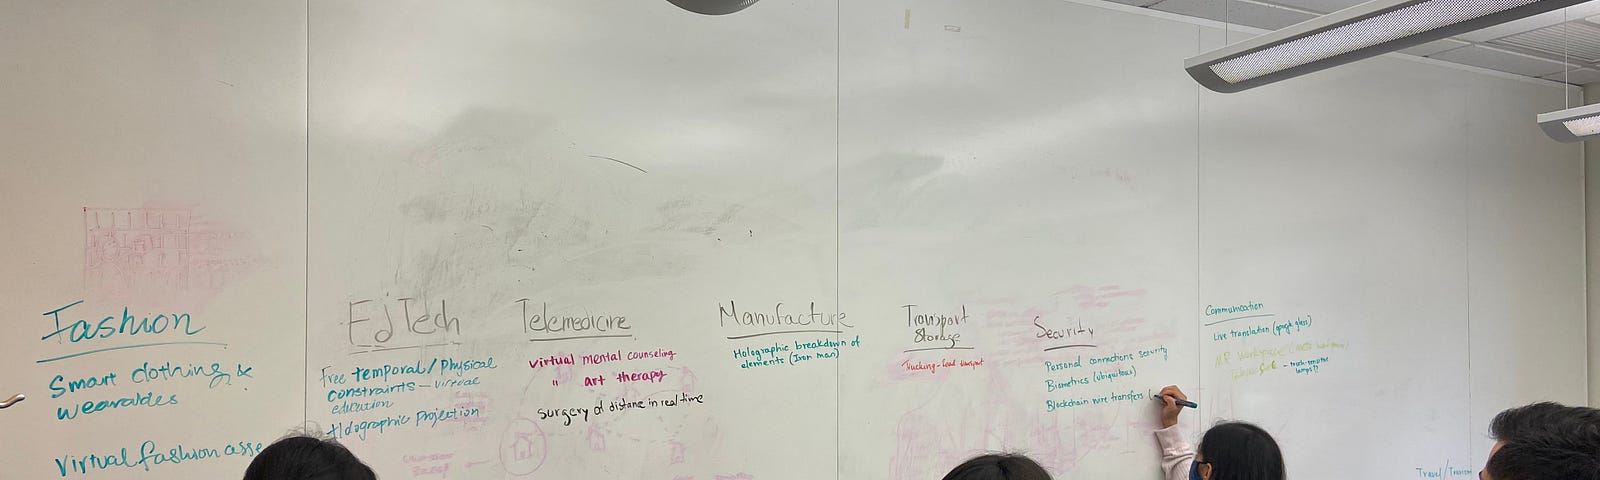 people in an office room writing on a whiteboard wall